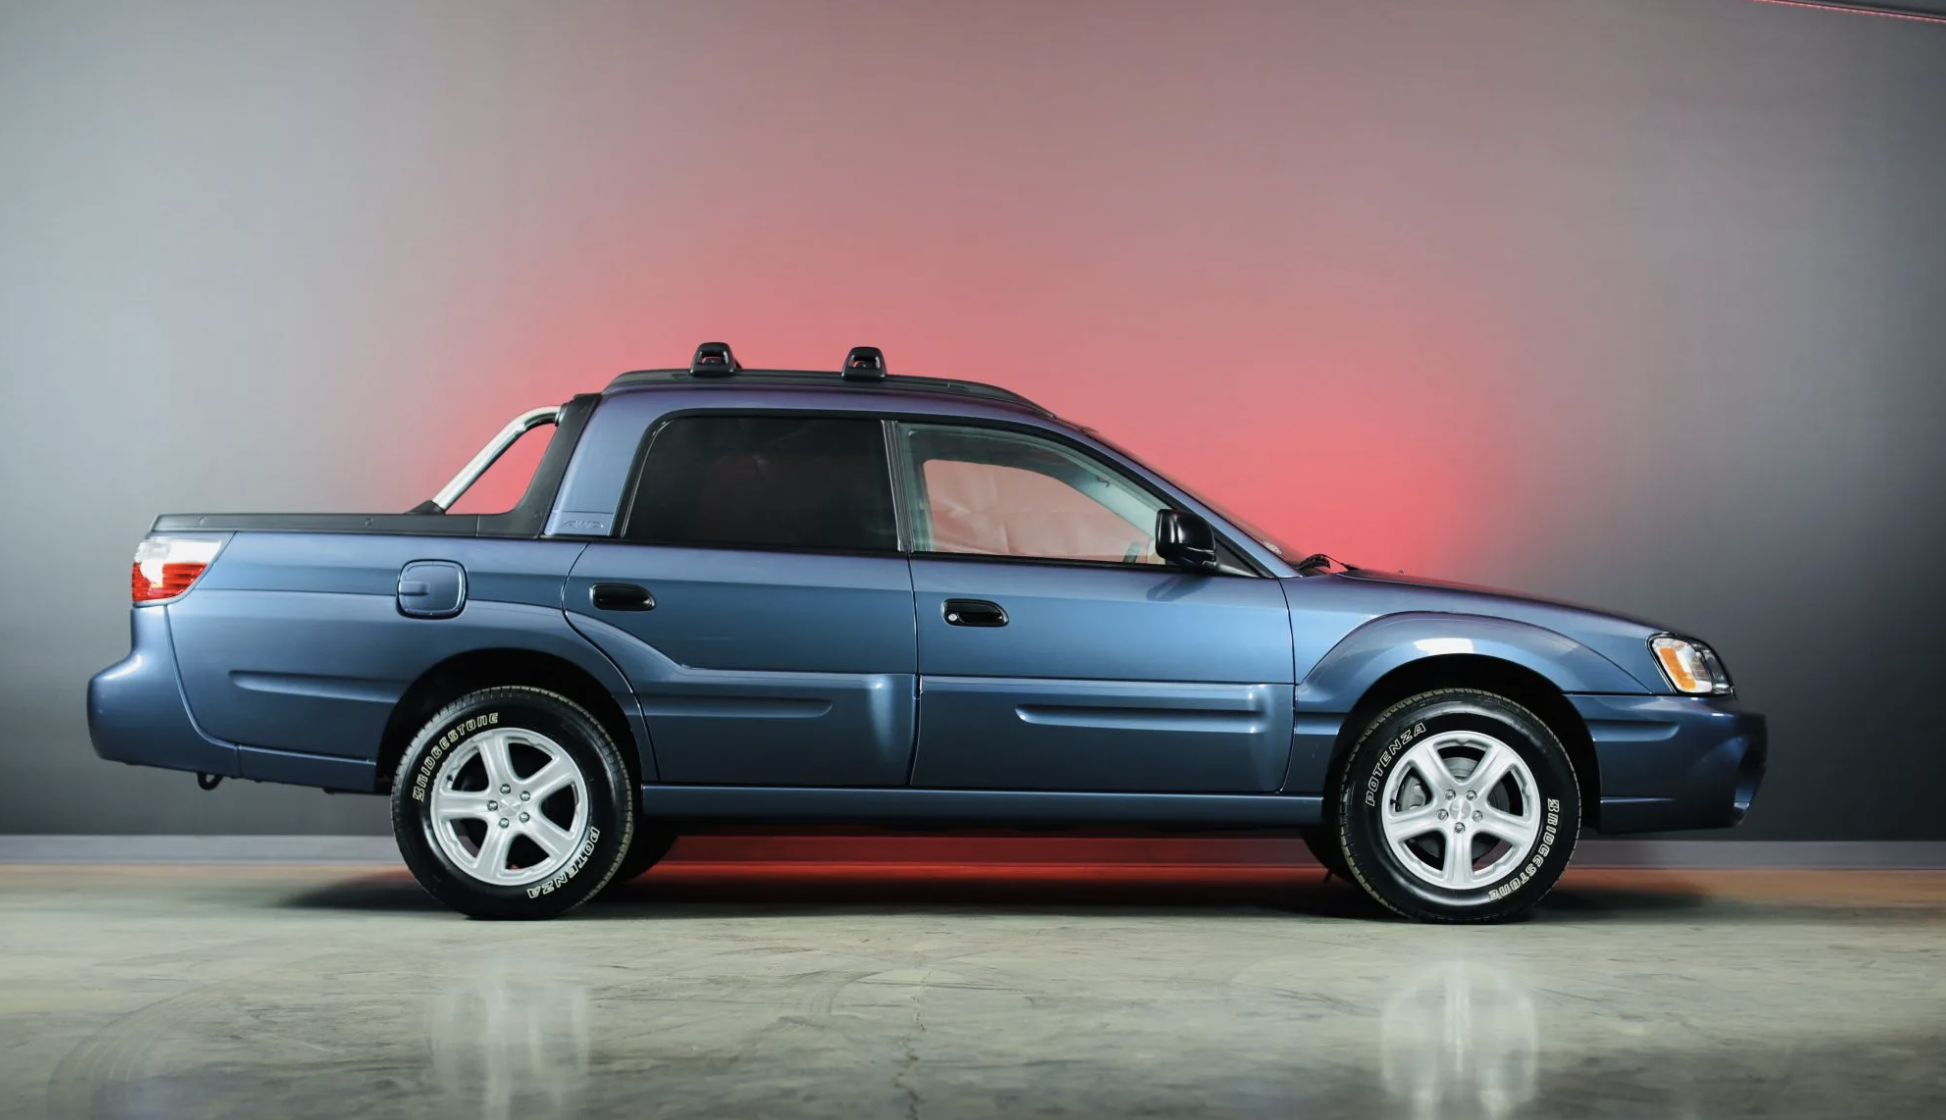 2006 Subaru Baja Is Our Bring a Trailer Auction Pick of the Day